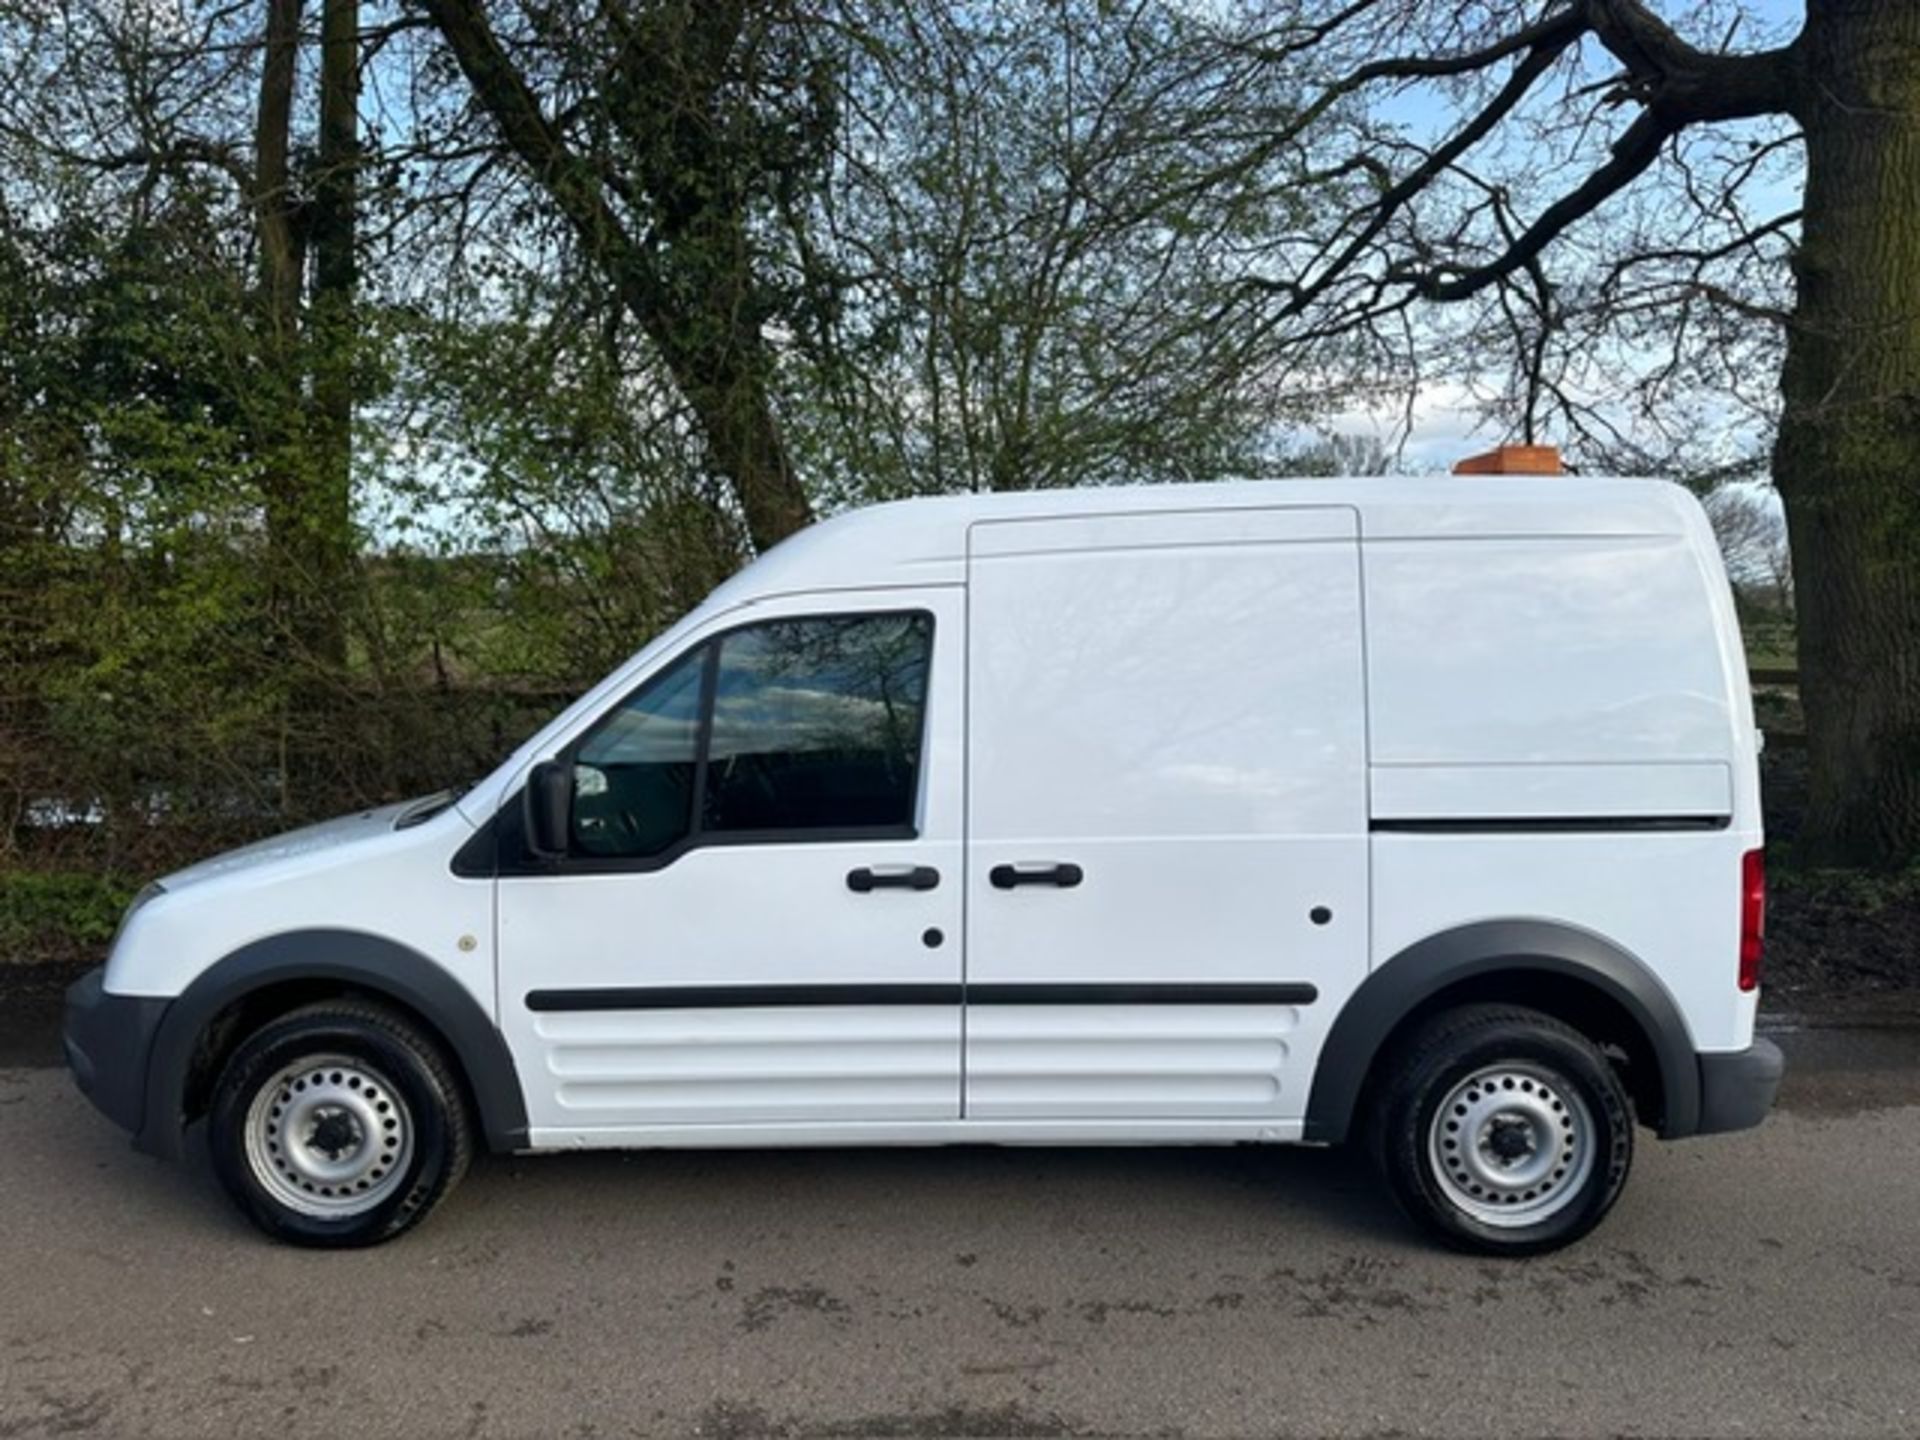 FORD TRANSIT CONNECT PANEL VAN REG:BV13 NKS 1.8LITRE. HIGH ROOF LWB. 83K REC MILES APPROX. WITH V5 A - Image 2 of 26